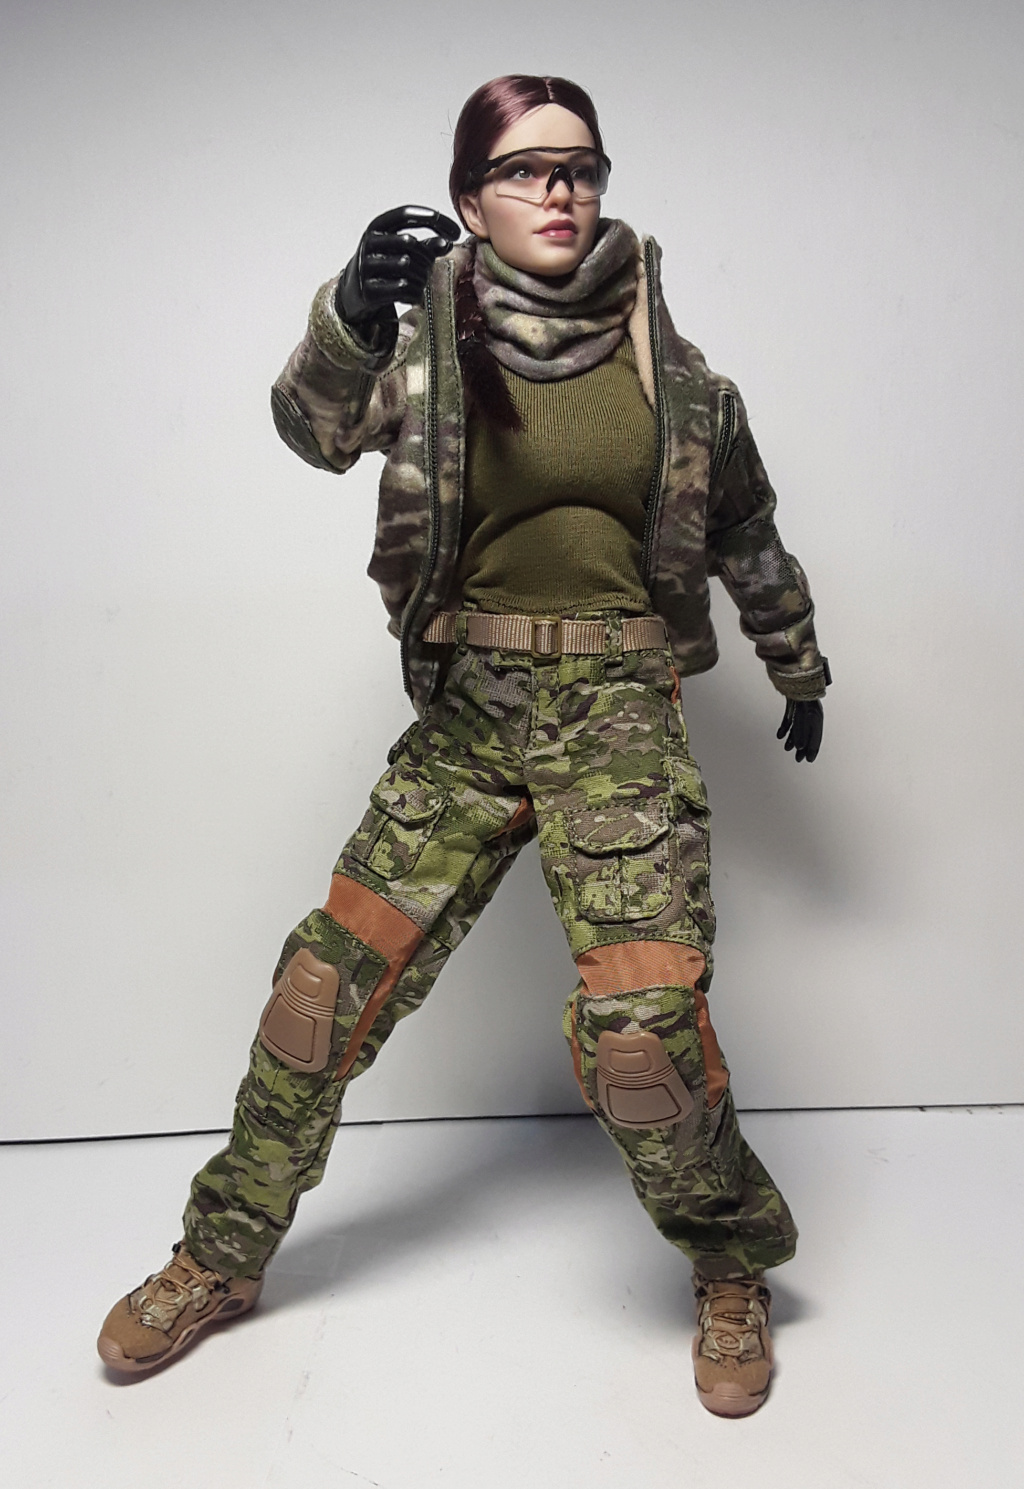 NEW PRODUCT: VERYCOOL: 1/6 Miss Spetsnaz: Russian Special Combat ...